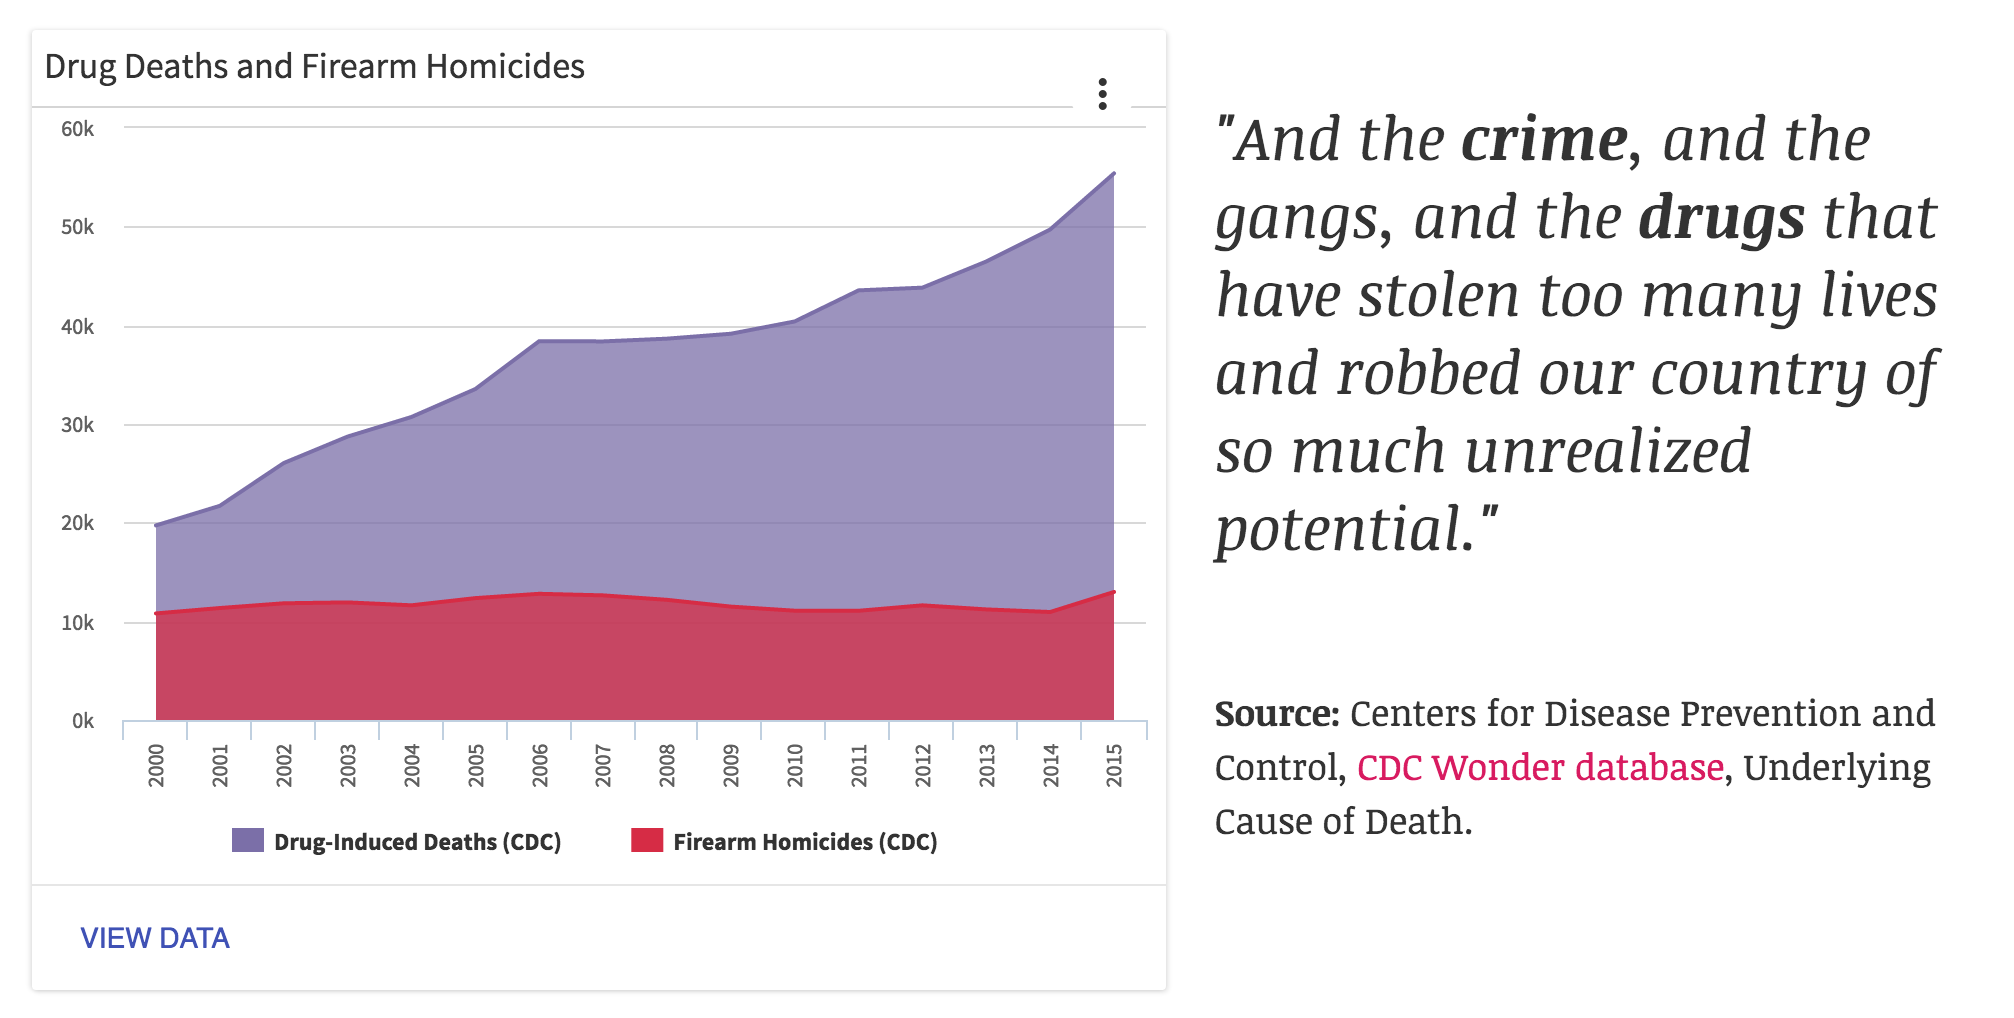 While some social maladies Trump mentions have stabilized or improved in recent years, others—like drug deaths, shown here in purple—are truly dire public health emergencies.&nbsp;